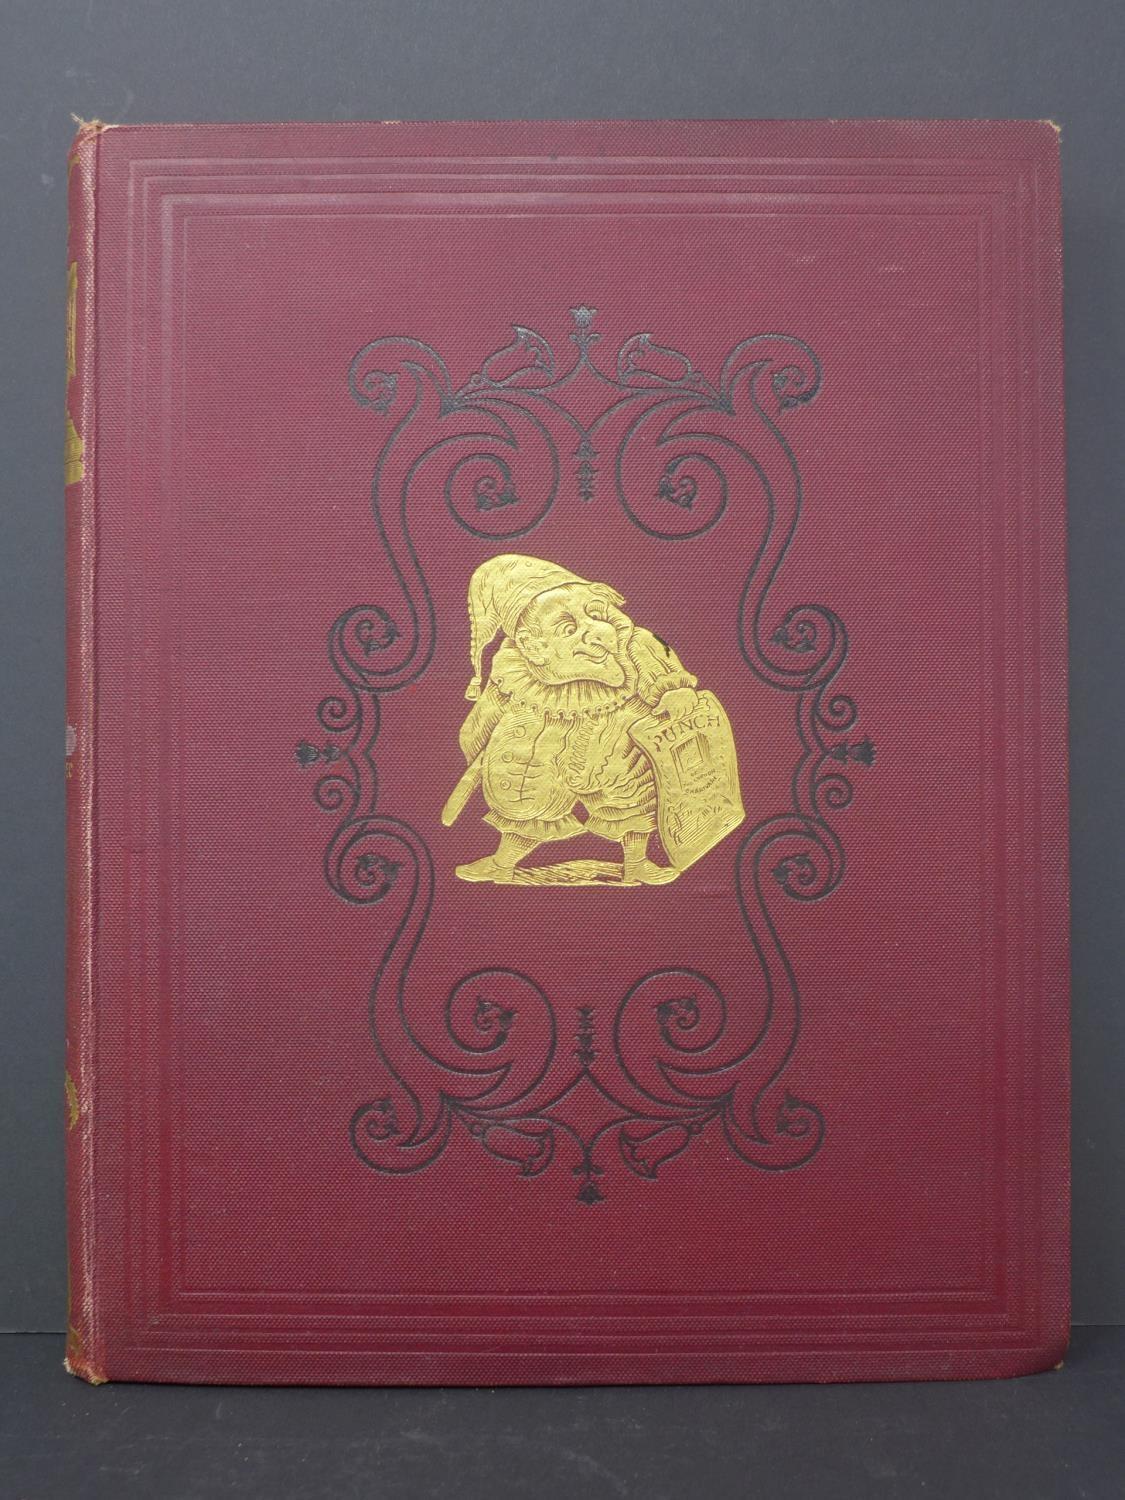 An 1891 July-Dec Edition of Punch magazine, red cloth bound and gilt cover, illustrated within, 28 x